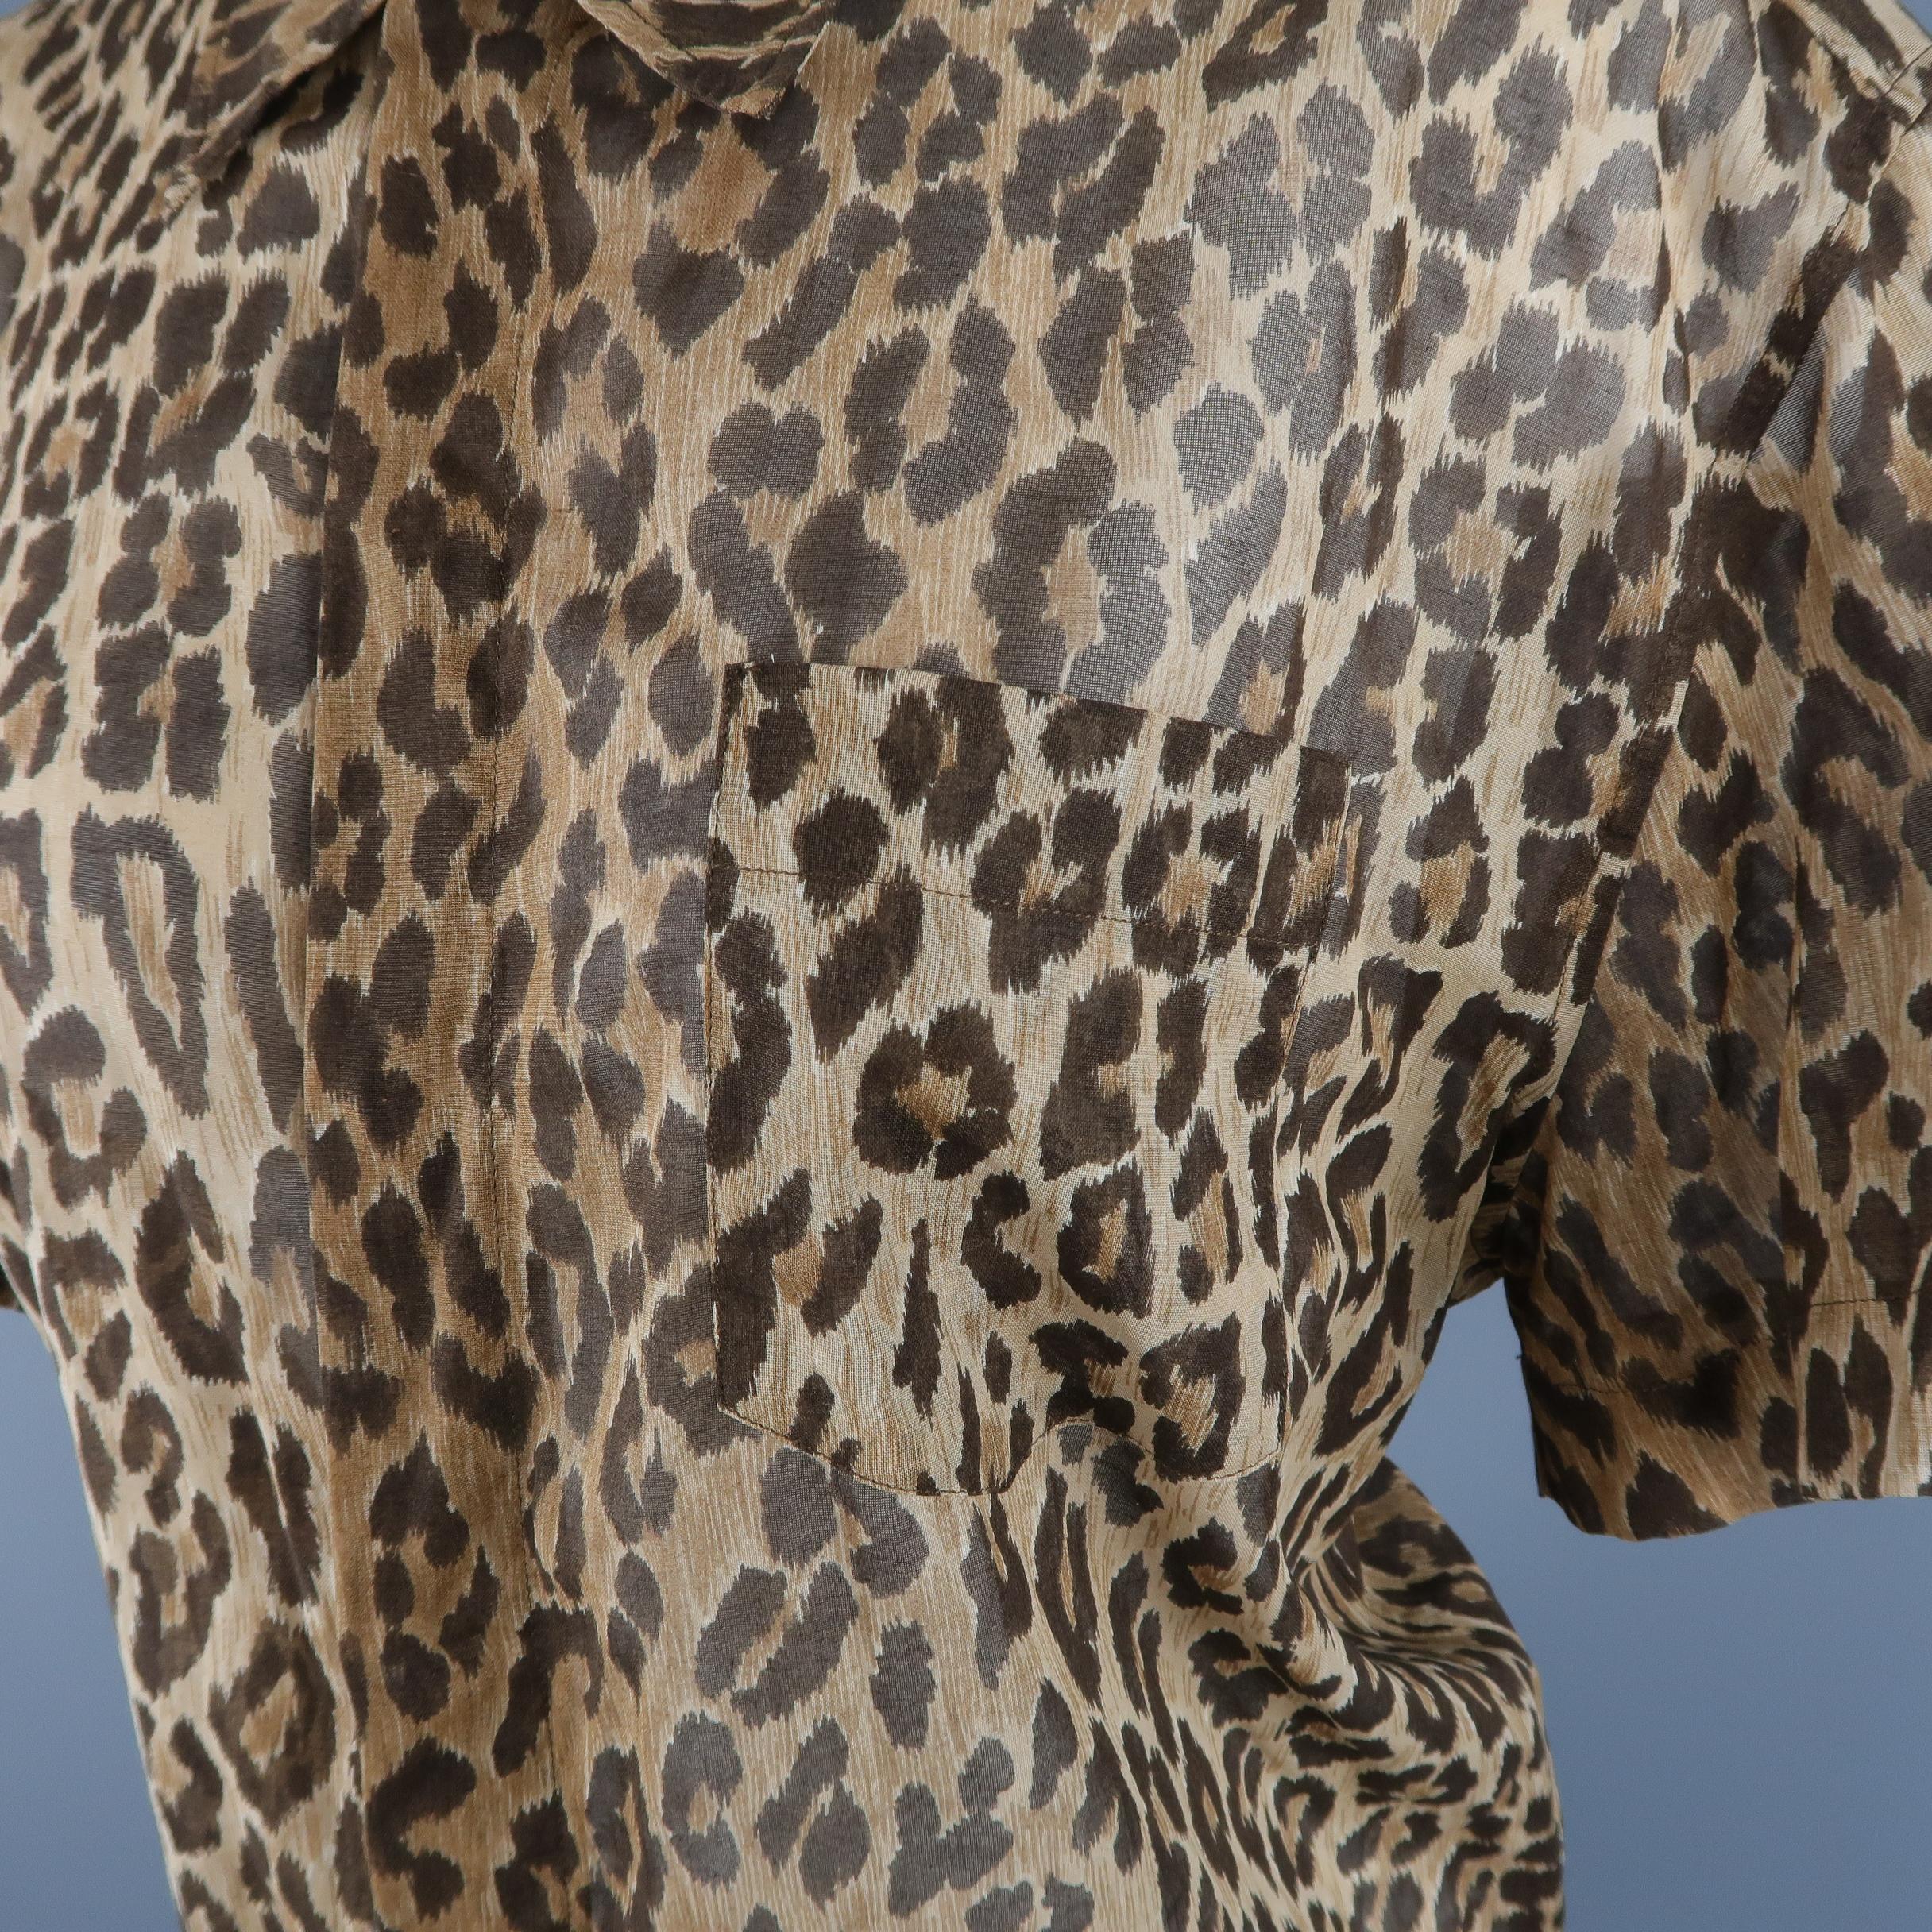 DOLCE & GABBANA blouse comes in sheer leopard print cotton with a pointed collar, short sleeves, breast pocket, and hidden snap front. Made in Italy.
 
Good Pre-Owned Condition.
Marked: IT 46
 
Measurements:
 
Shoulder: 18 in.
Bust: 44 in.
Sleeve: 8